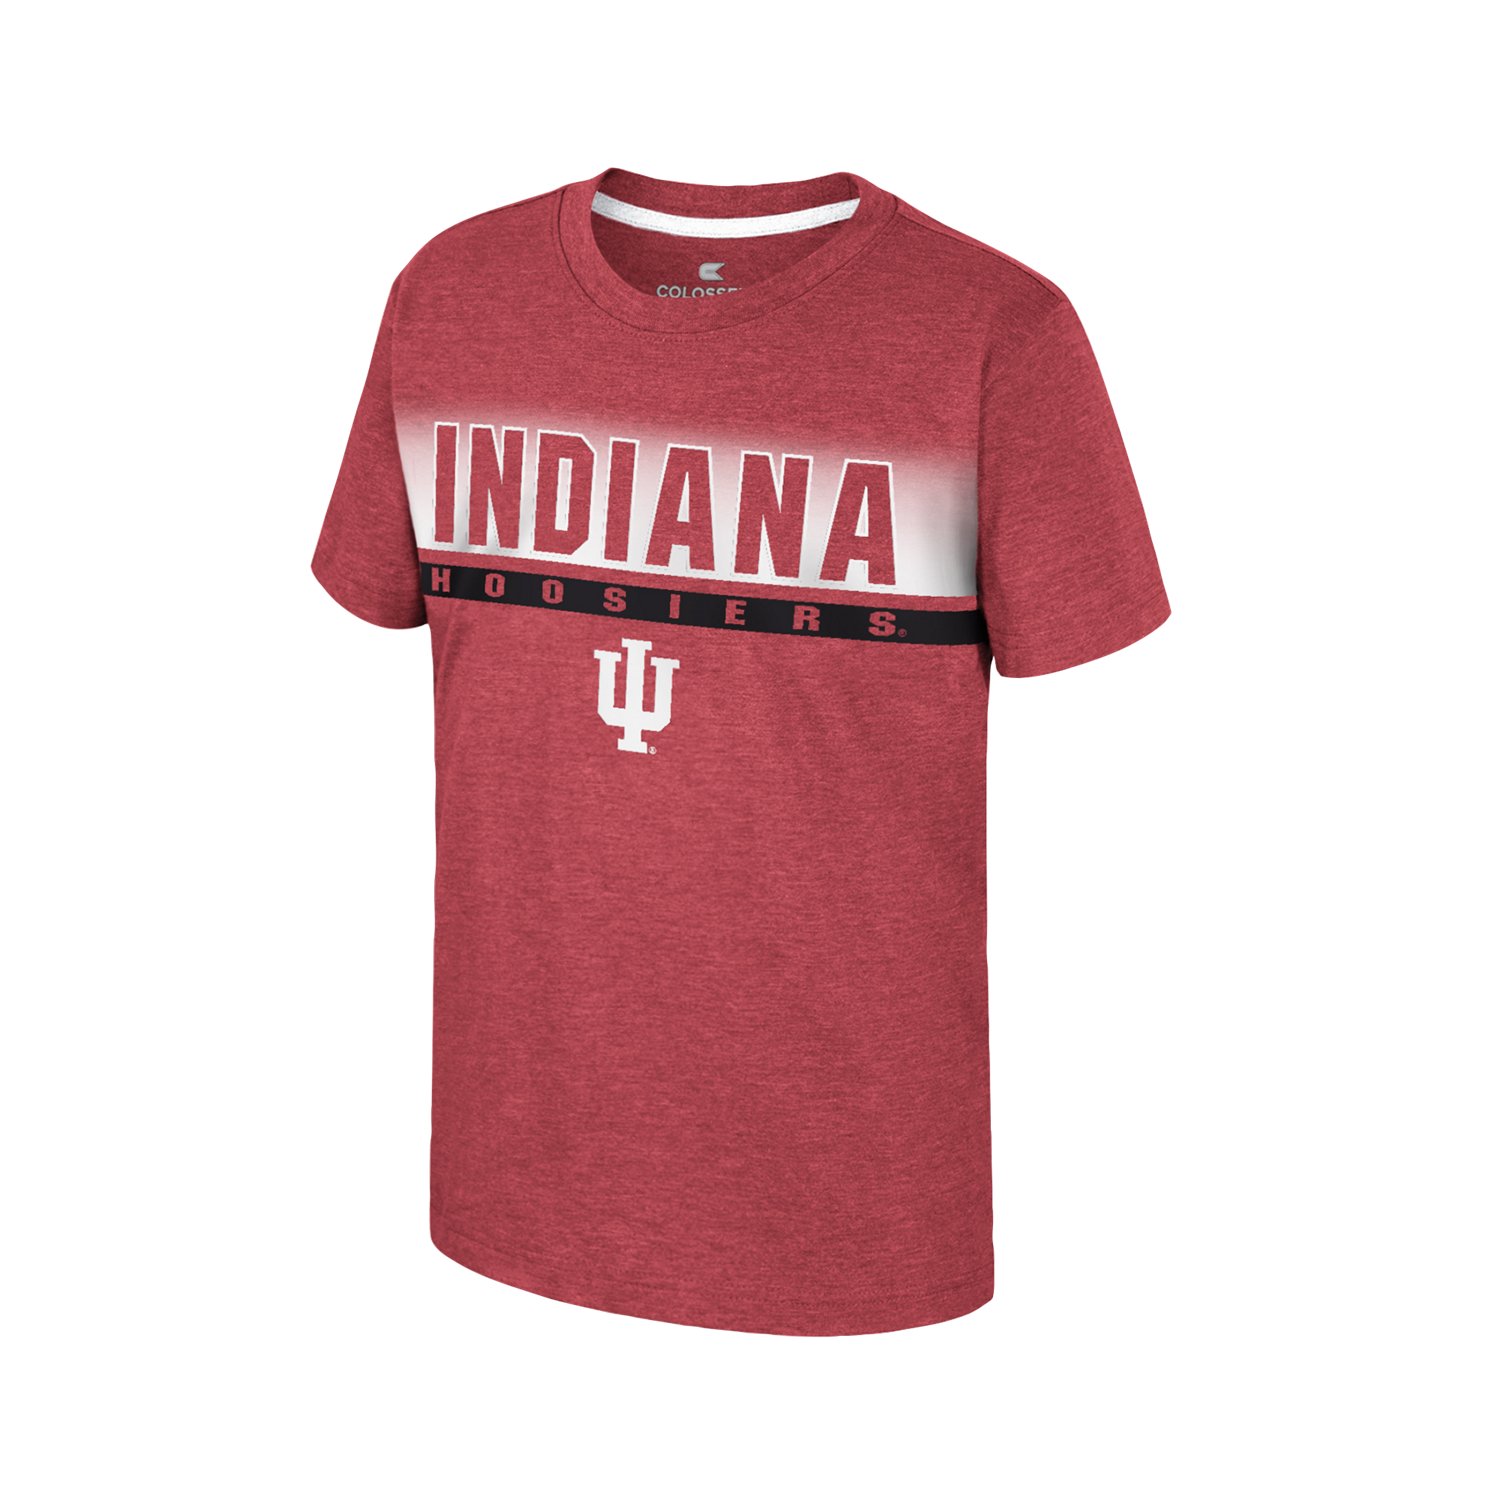 Colosseum Athletics Boys' 8-20 Indiana University Finn T-Shirt Red, Large - NCAA Youth Apparel at Academy Sports